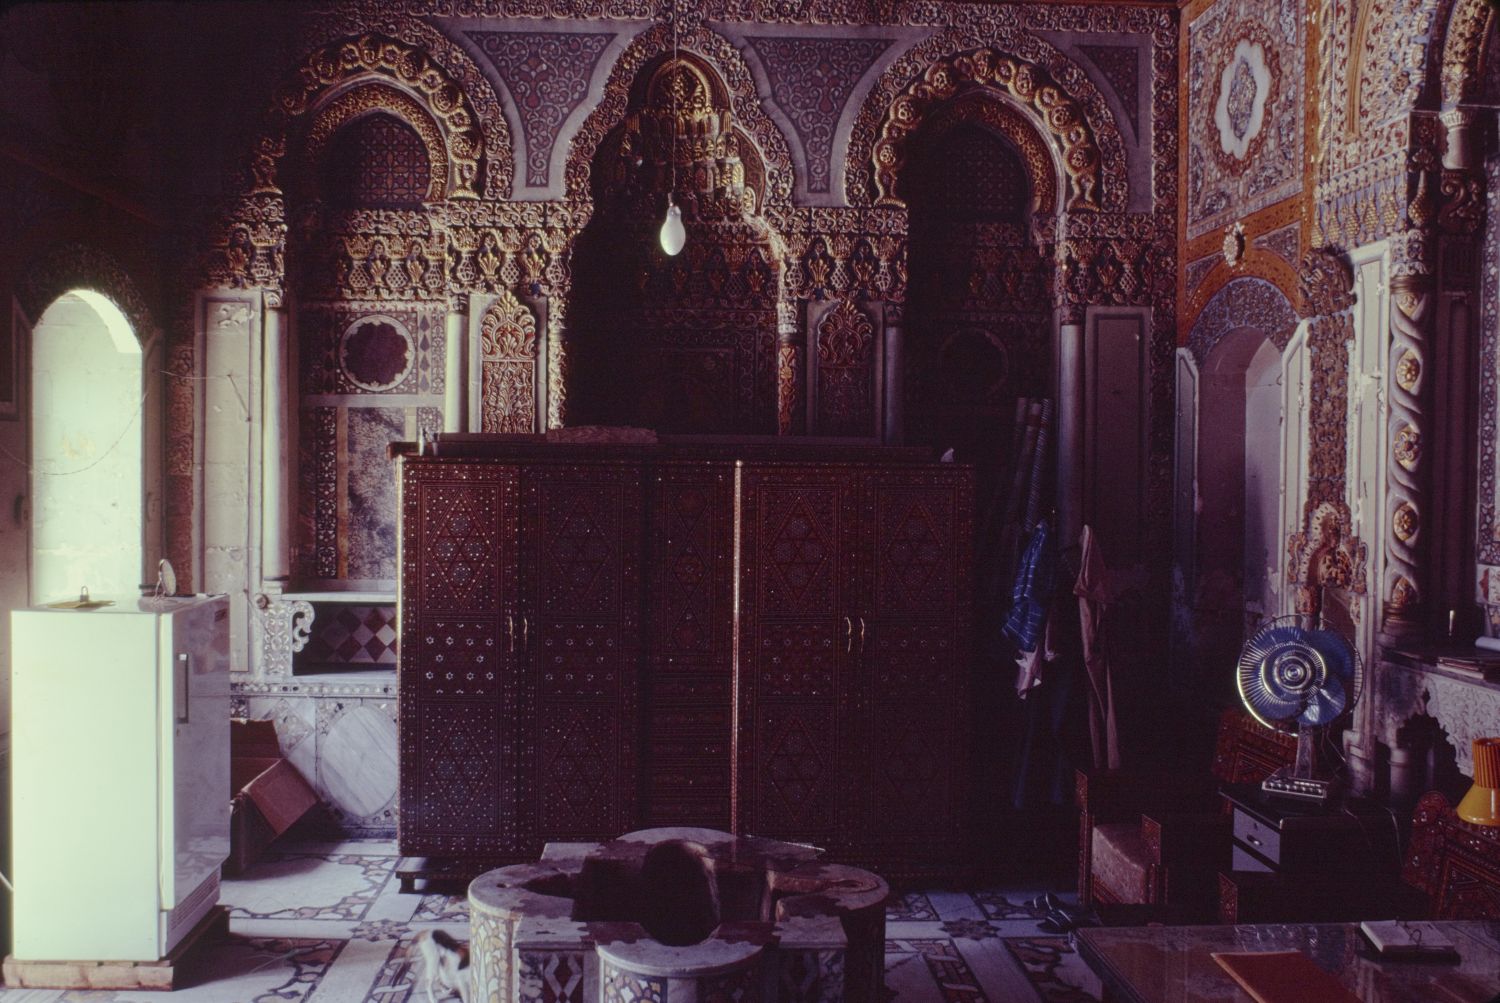 Interior view of room north of courtyard.